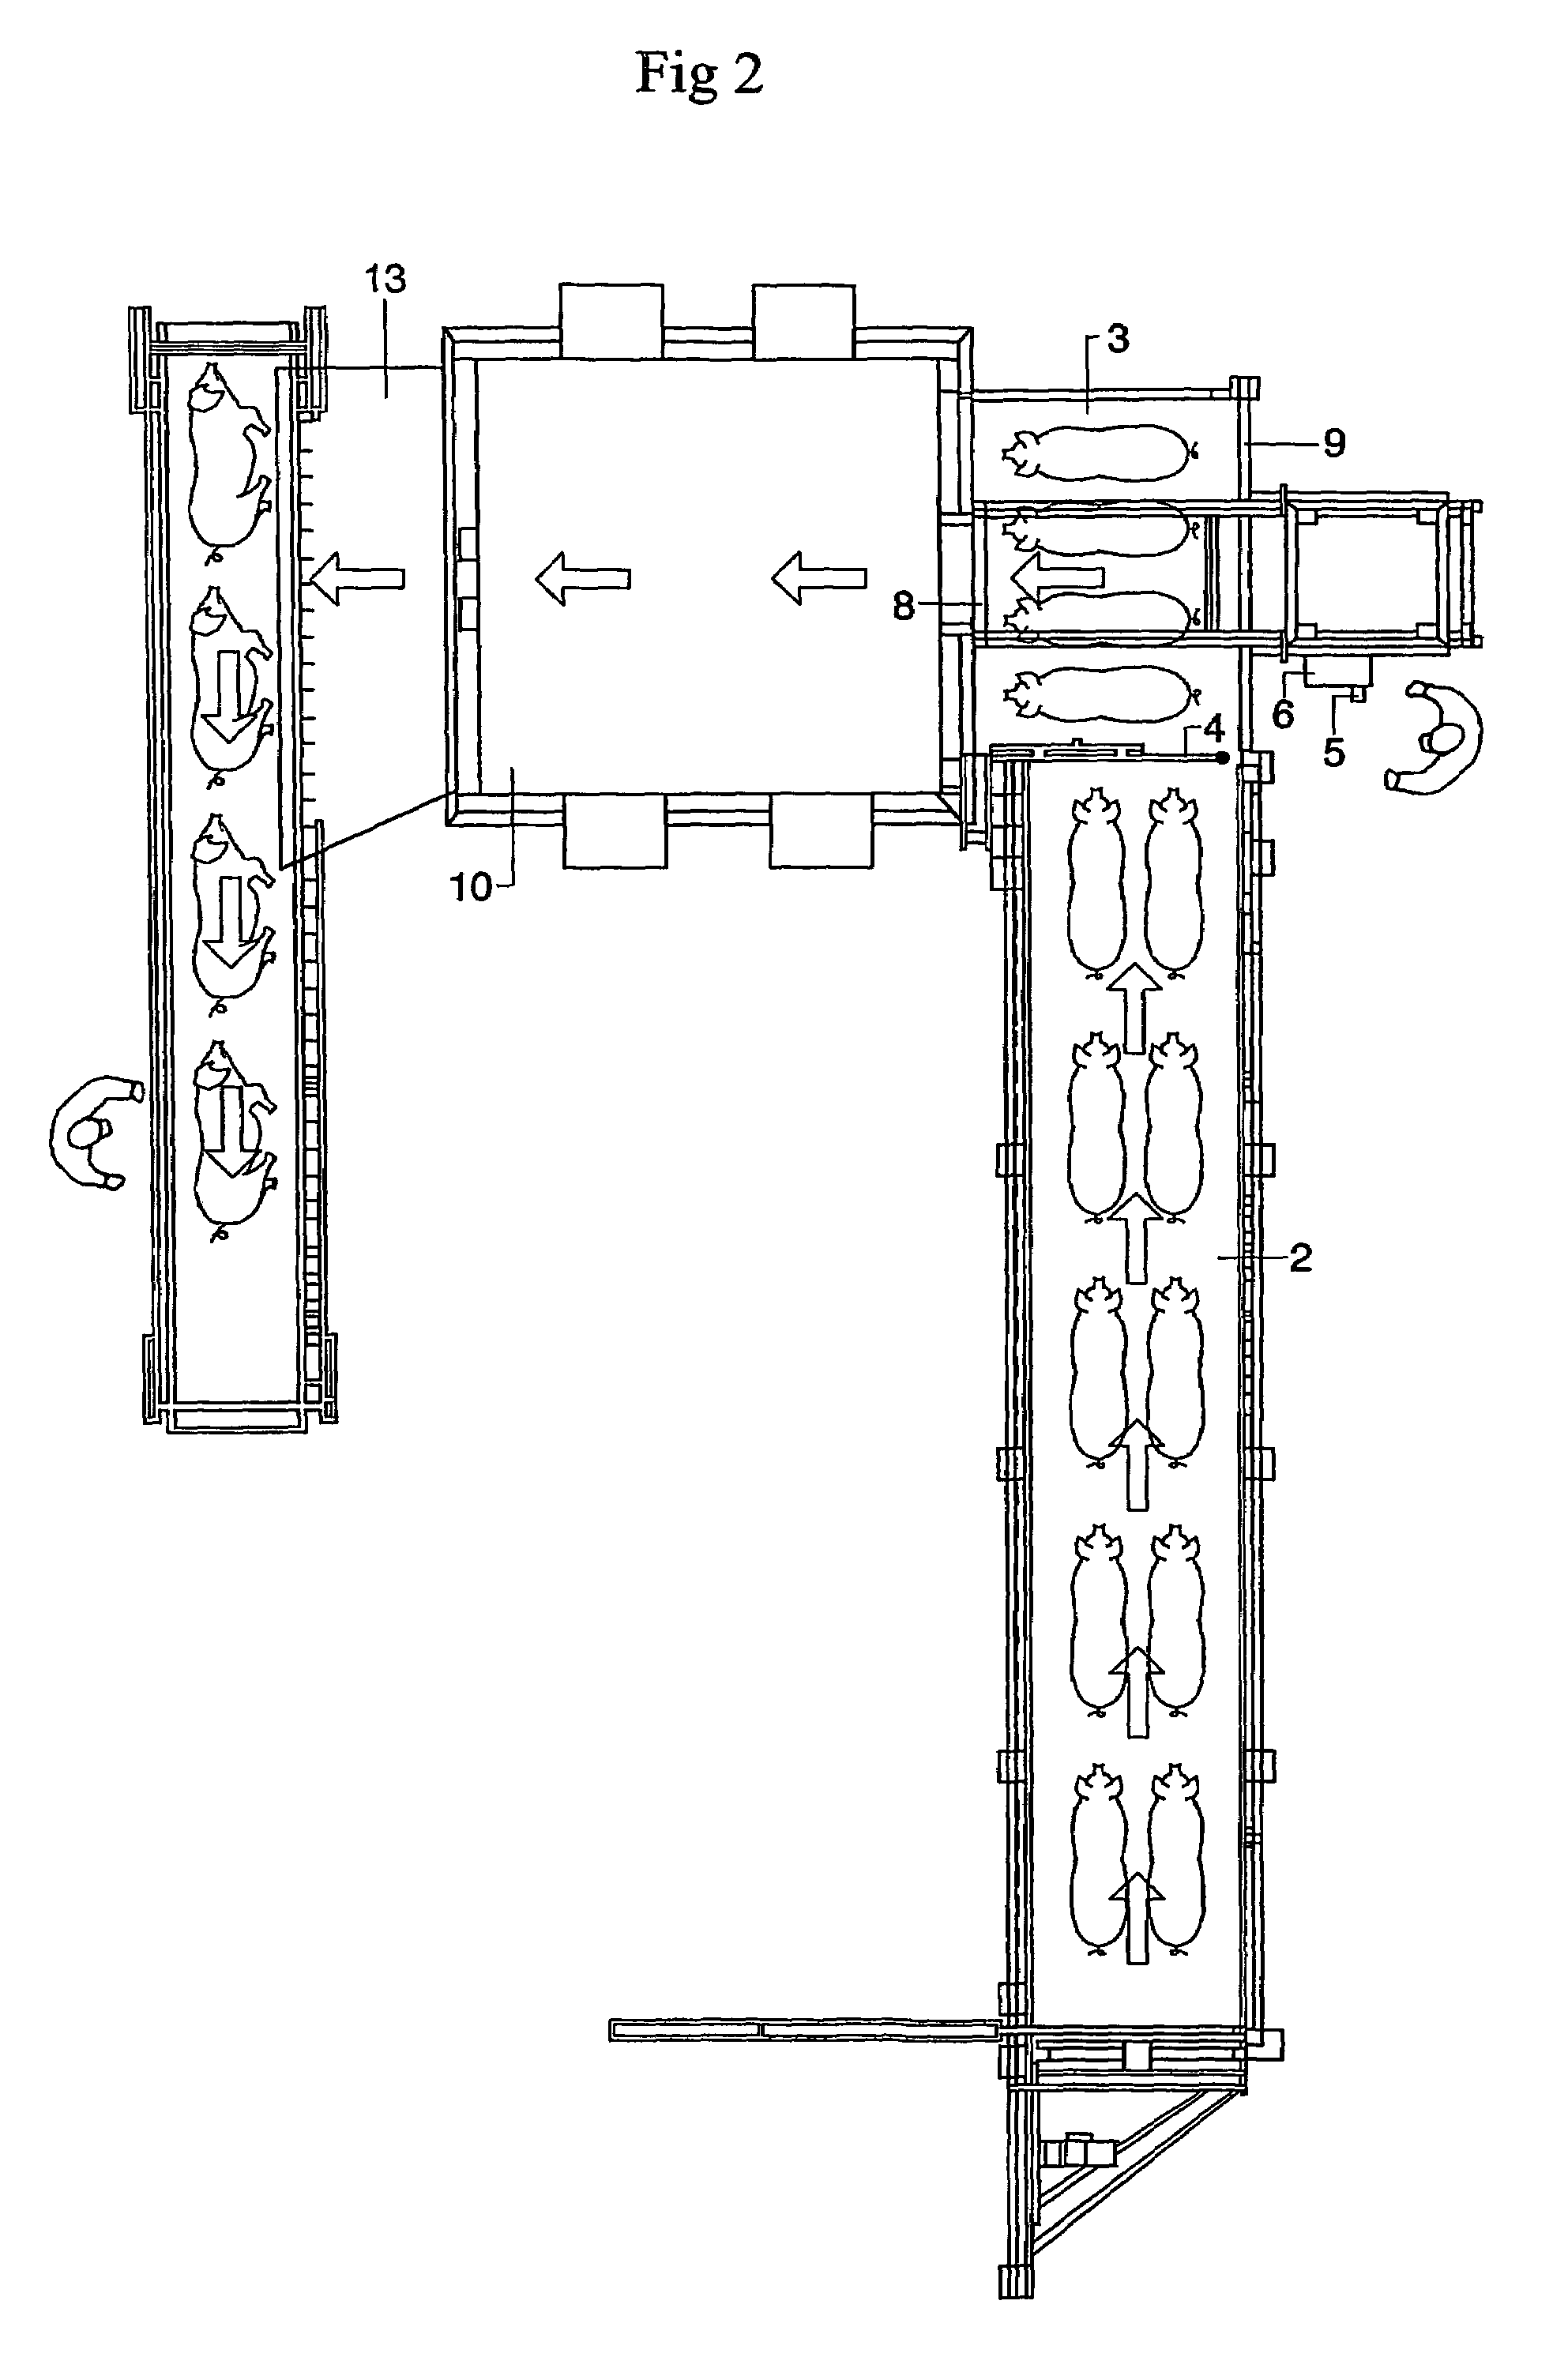 Method and apparatus for stunning of slaughter animals